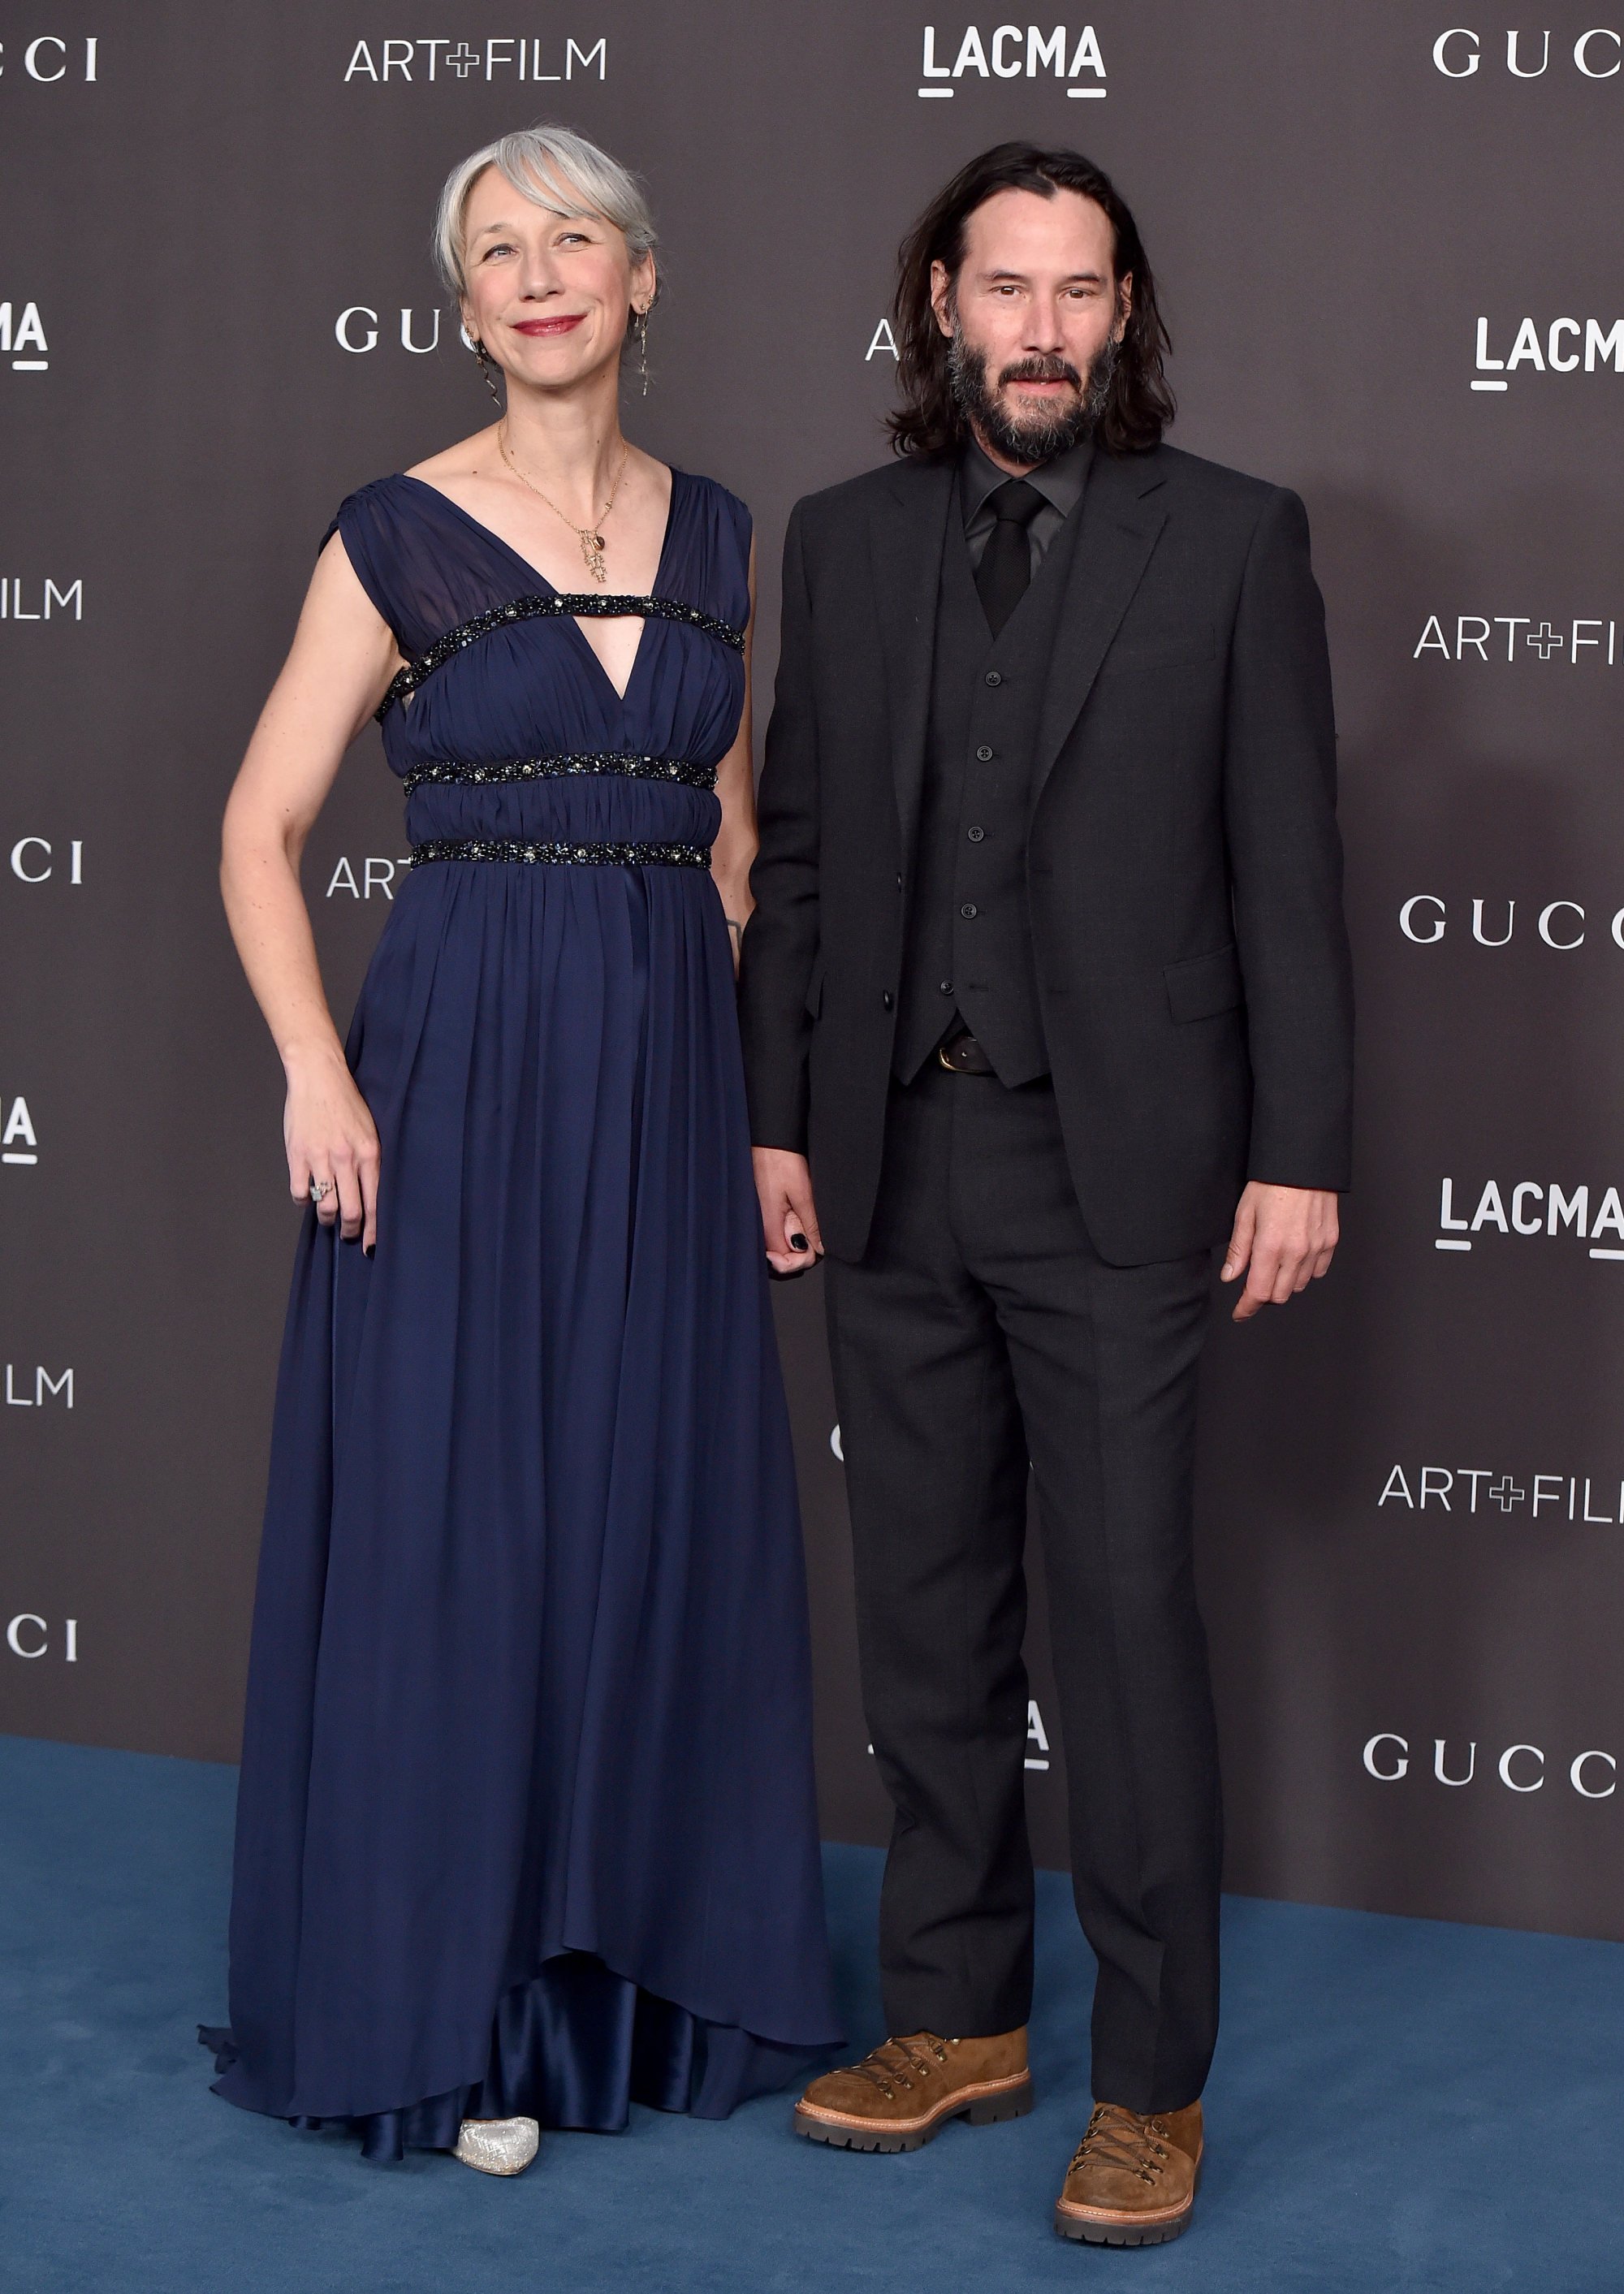 Alexandra Grant and Keanu Reeves at the LACMA Art + Film Gala in November 2019. Photo: Getty Images